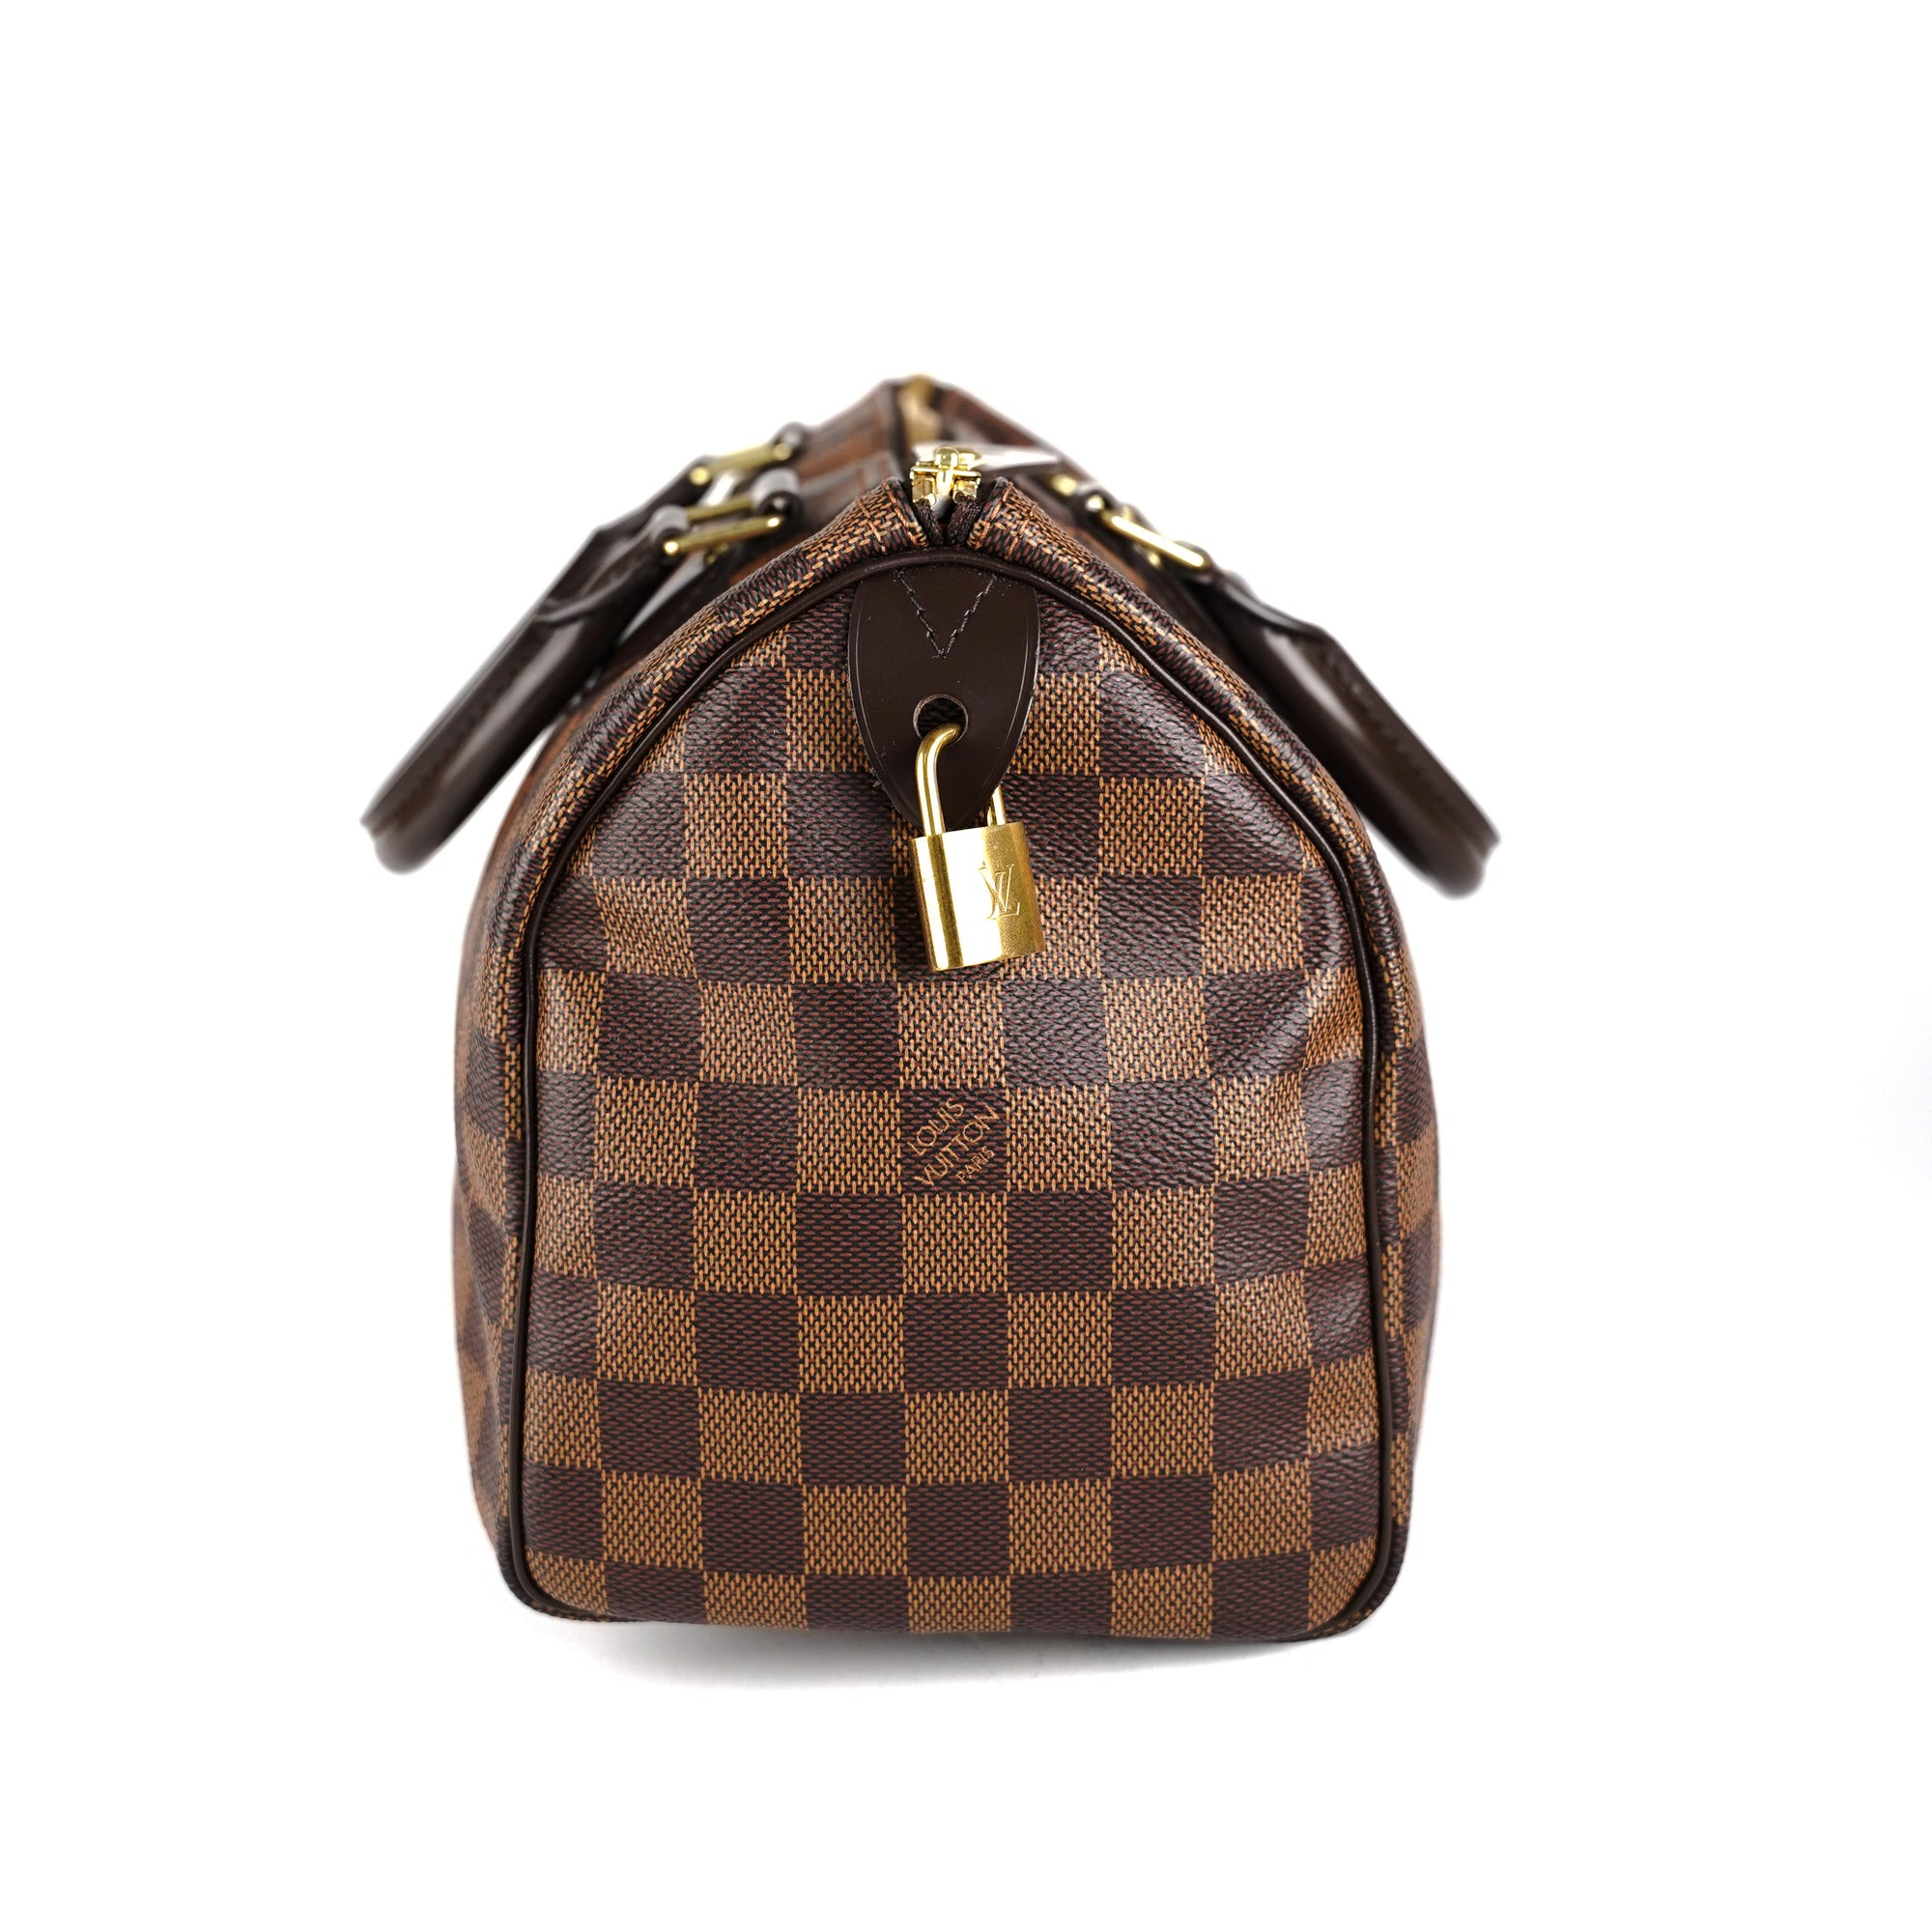 Too Good To Be Threw Designer Fashion and Furniture - Luxury Handbag 101  --> Louis Vuitton Azur Speedy The Damier canvas pattern was introduced and  trademarked in 1888. The first speedy was